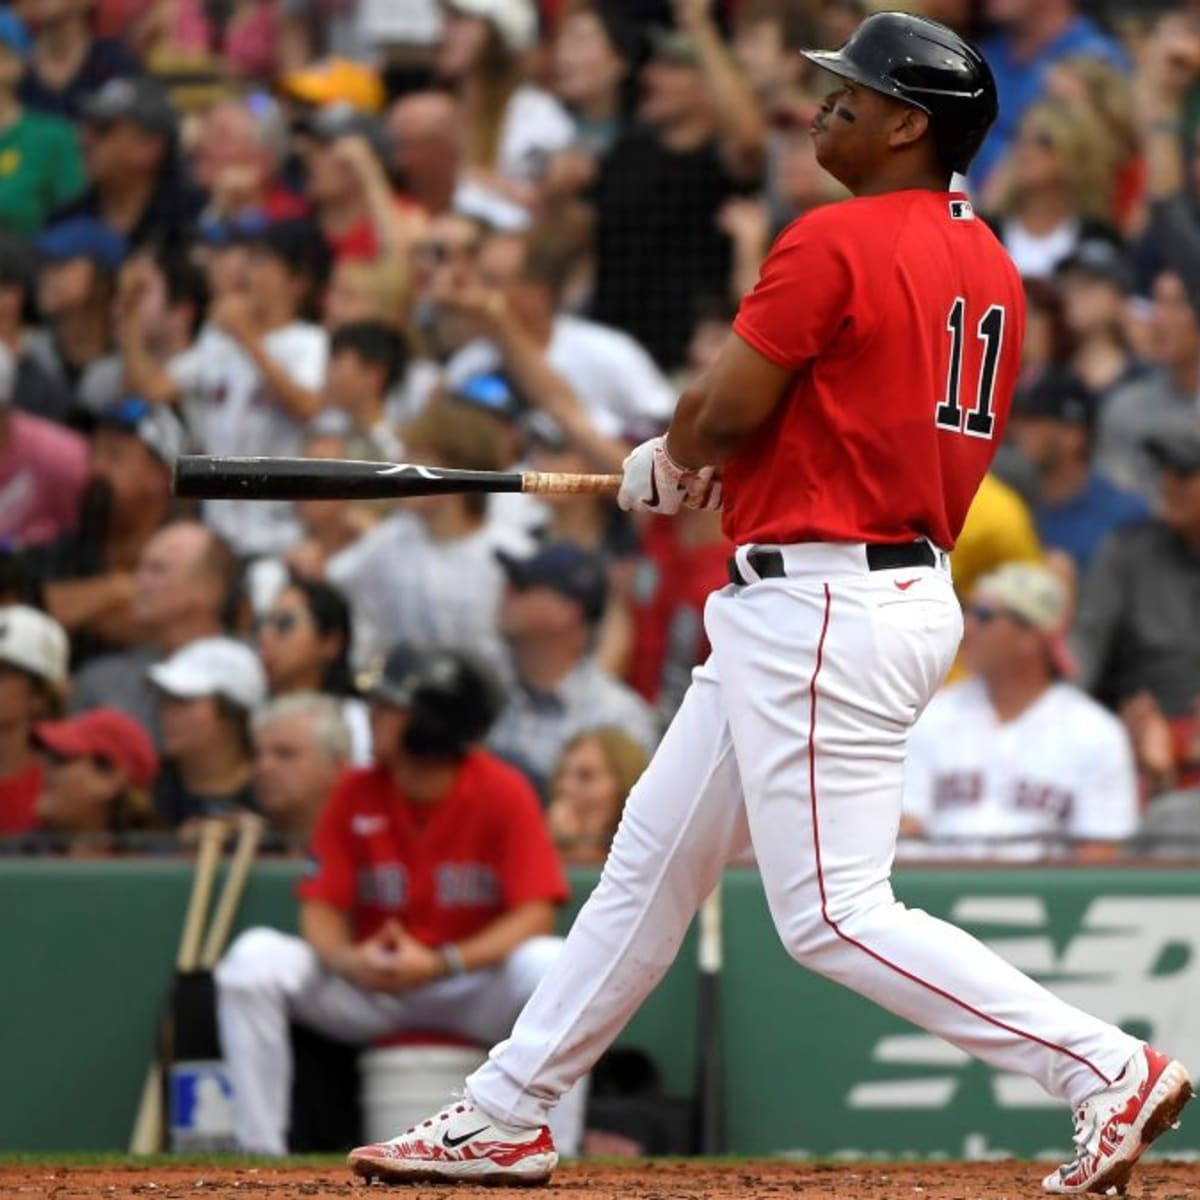 Boston Red Sox 3B Rafael Devers hangs his head after flying out